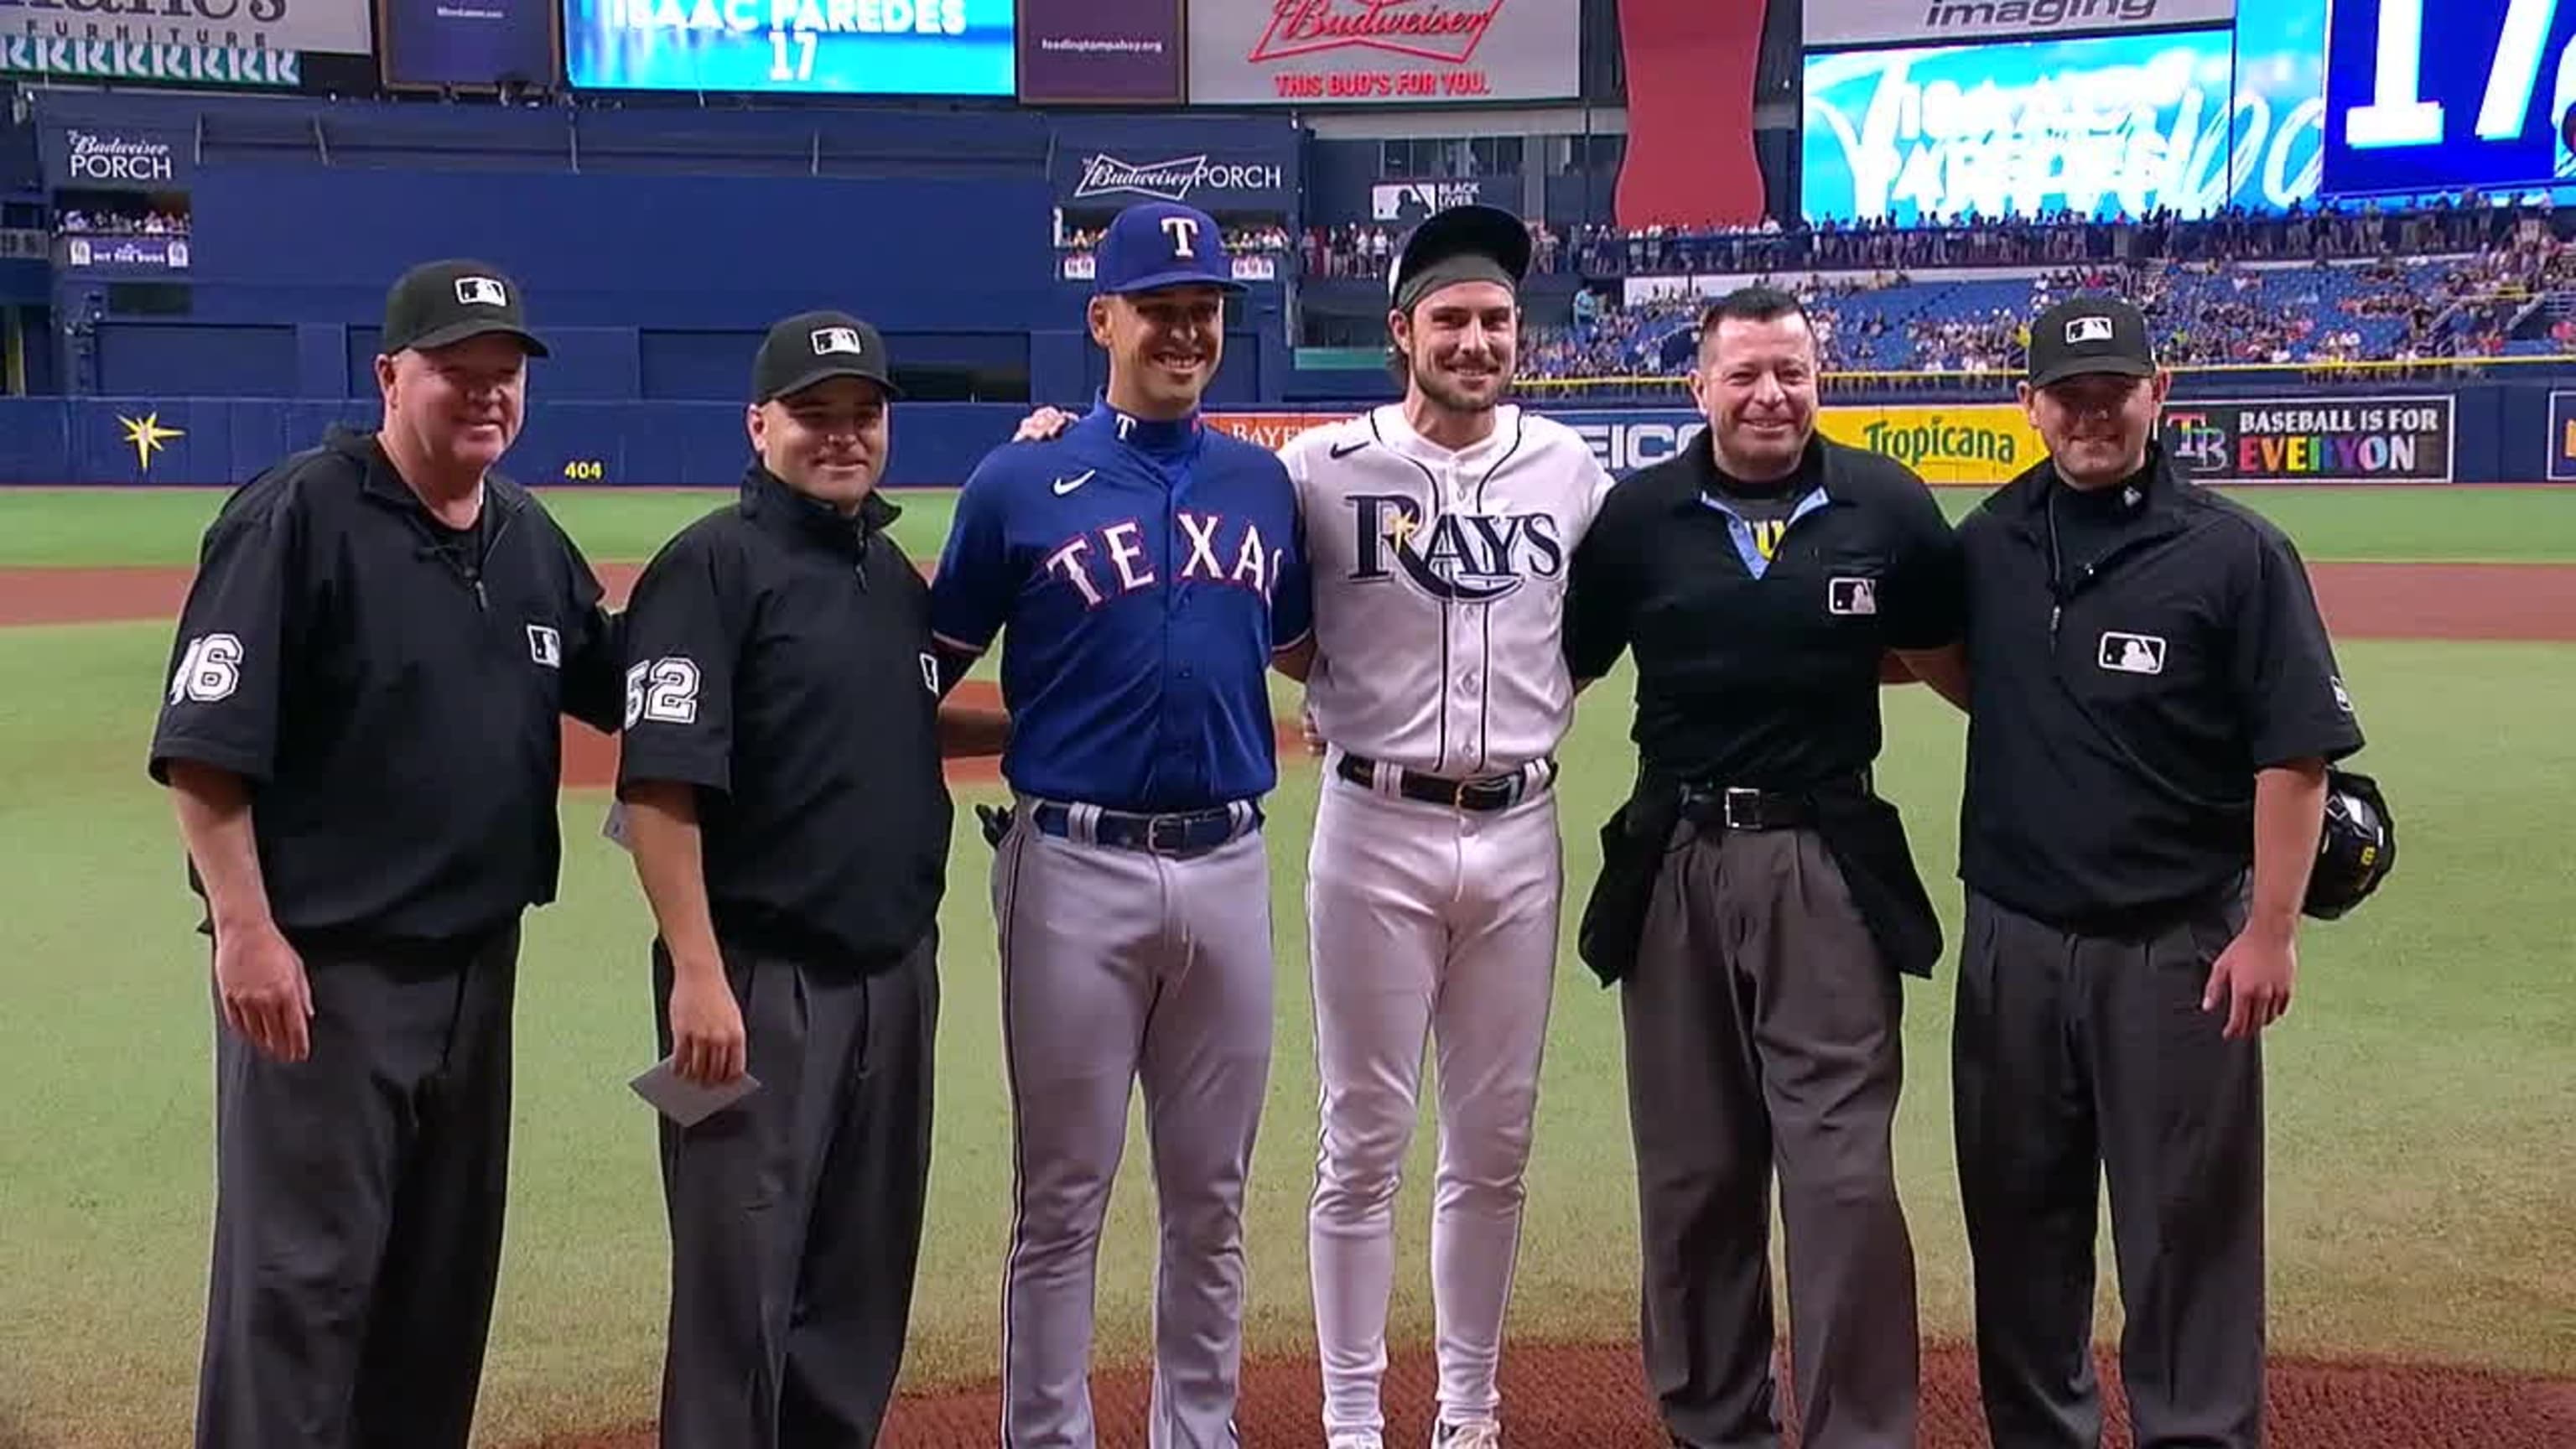 Brothers Josh, Nathaniel Lowe Make History in Rays-Rangers AL Wild Card  Series - Fastball